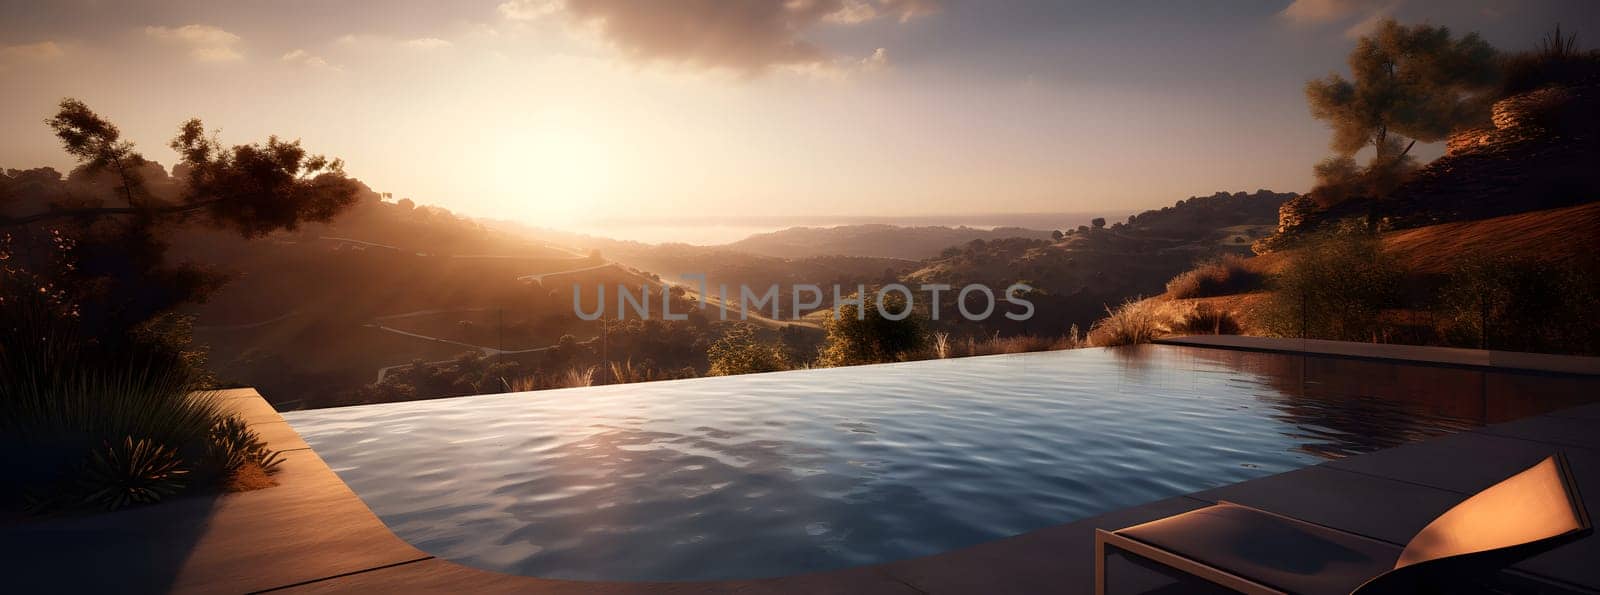 a pool on terrace with overlooking hill view at expensive villa or rich resort, neural network generated photorealistic image by z1b